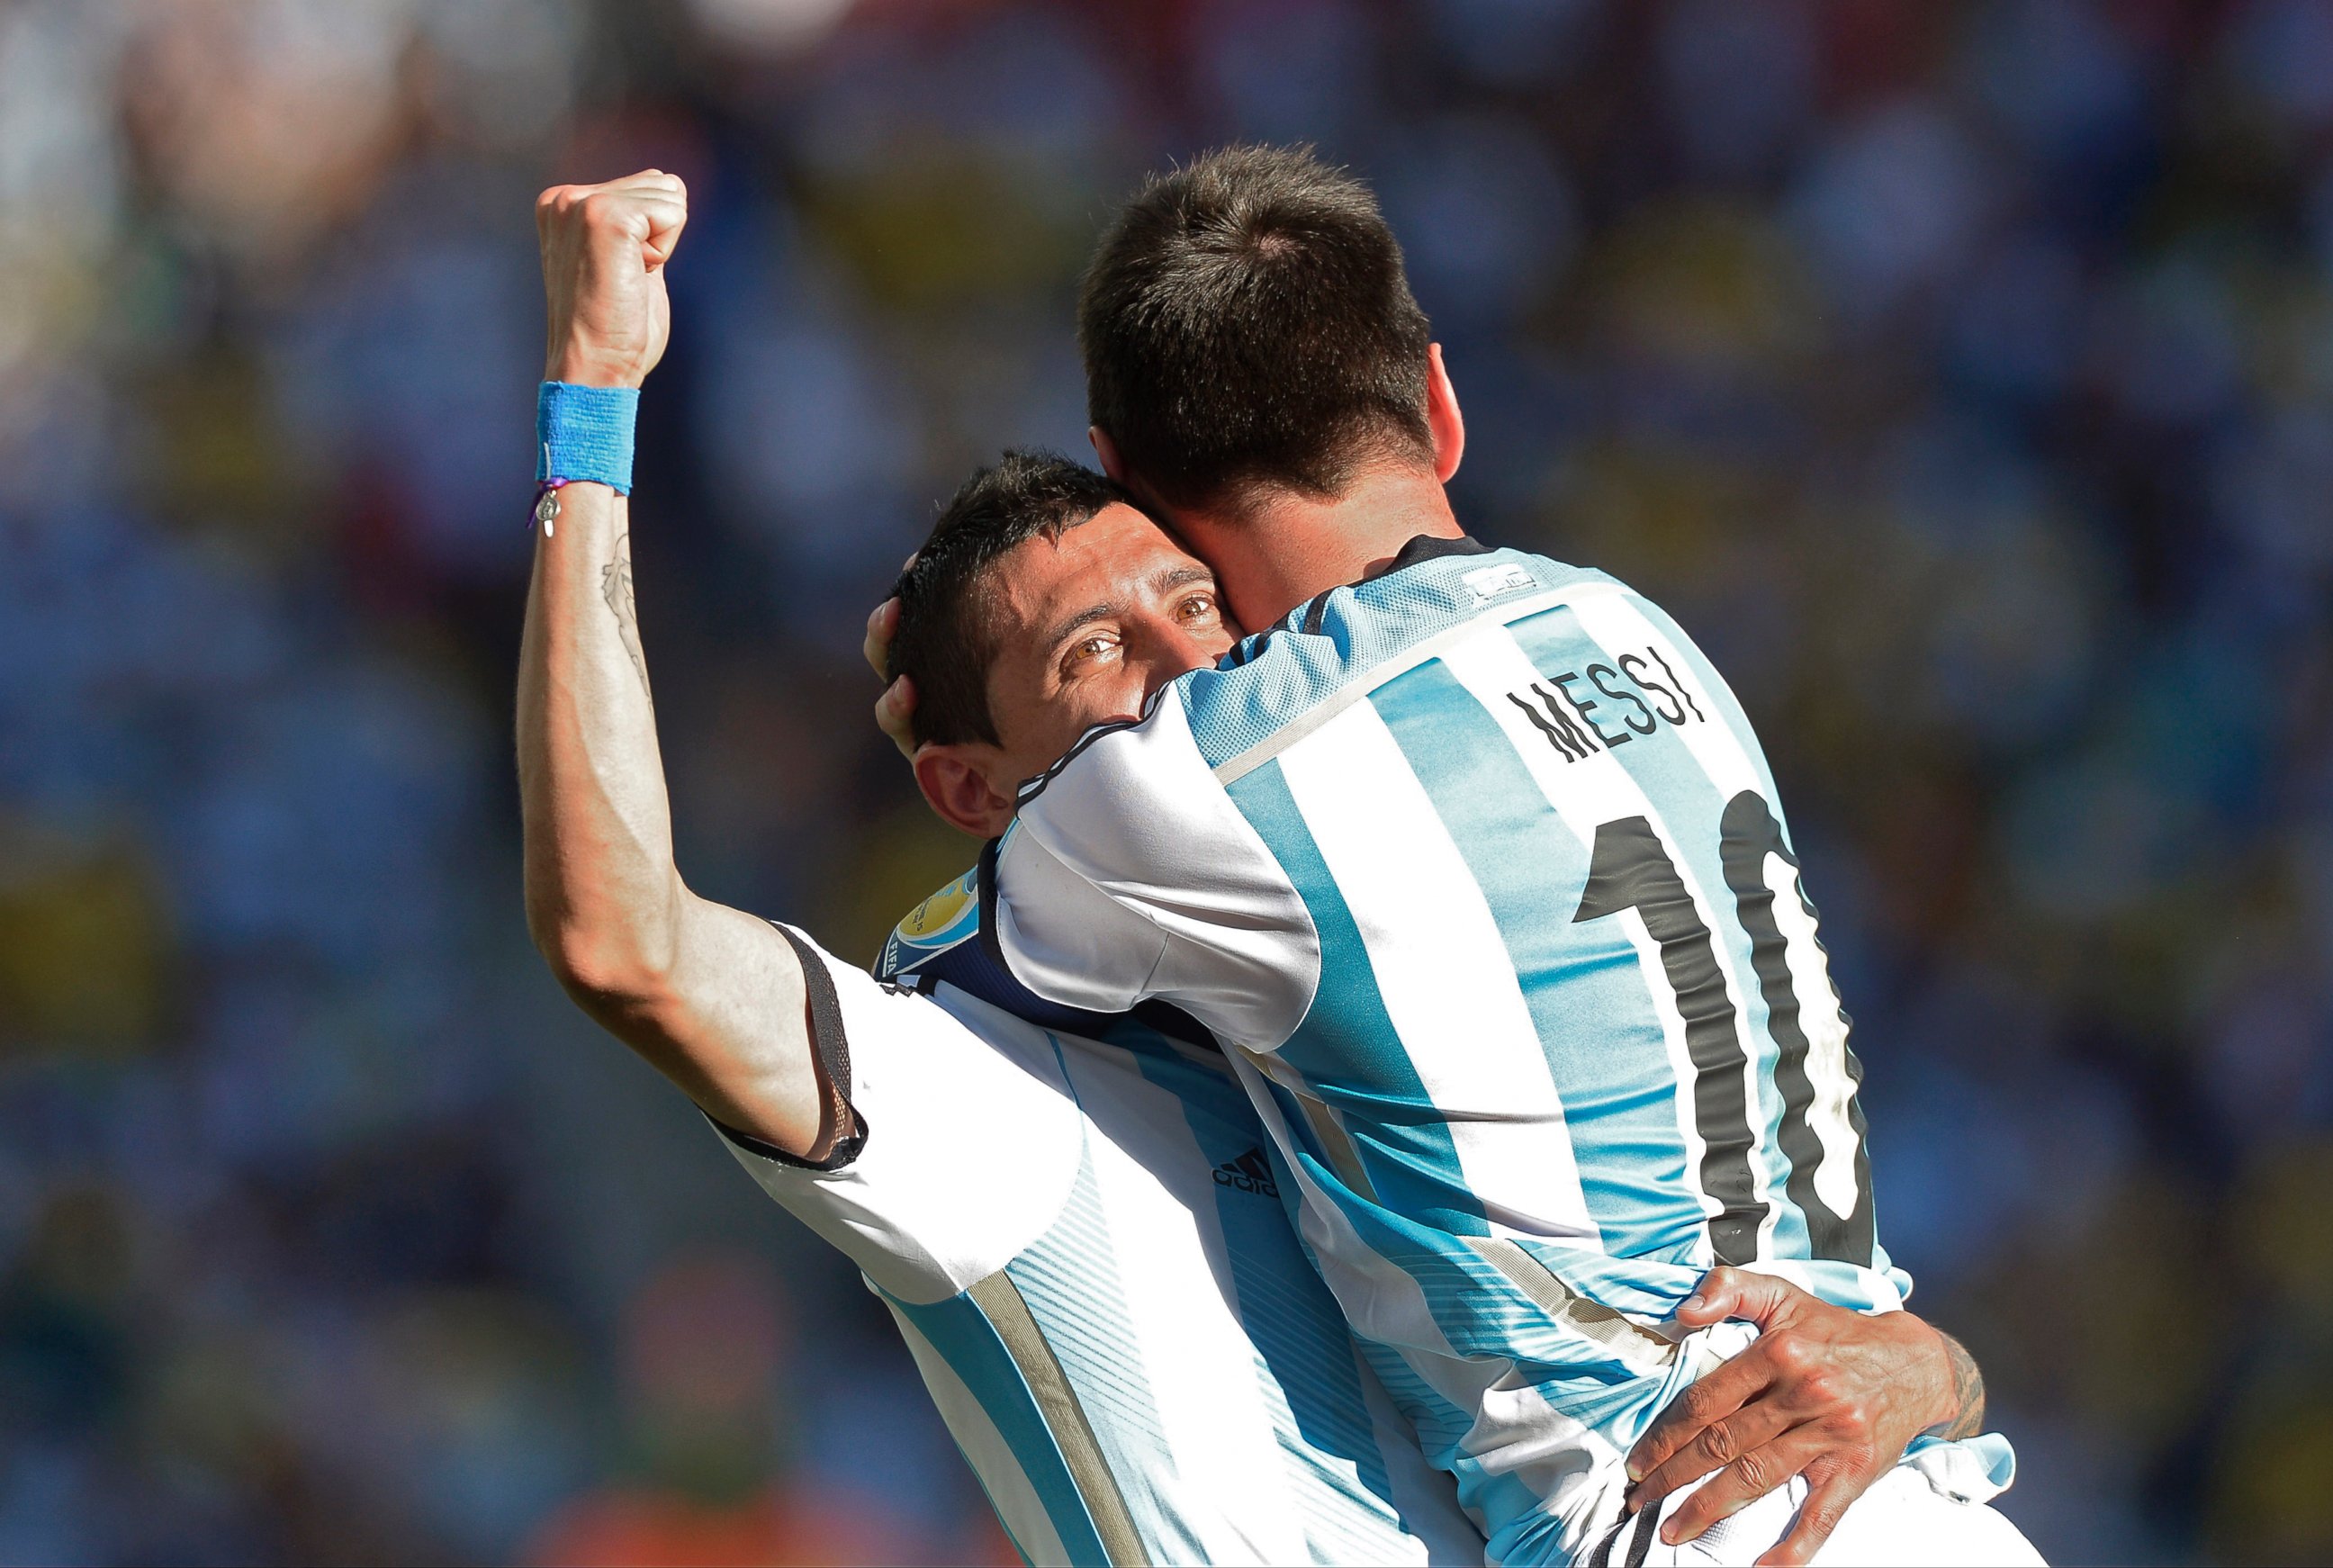 PHOTO: Argentina's Lionel Messi celebrates with Angel di Maria after di Maria scored his side's only and winning goal in extra time during the World Cup match between Argentina and Switzerland at the Itaquerao Stadium in Sao Paulo, Brazil, July 1, 2014.